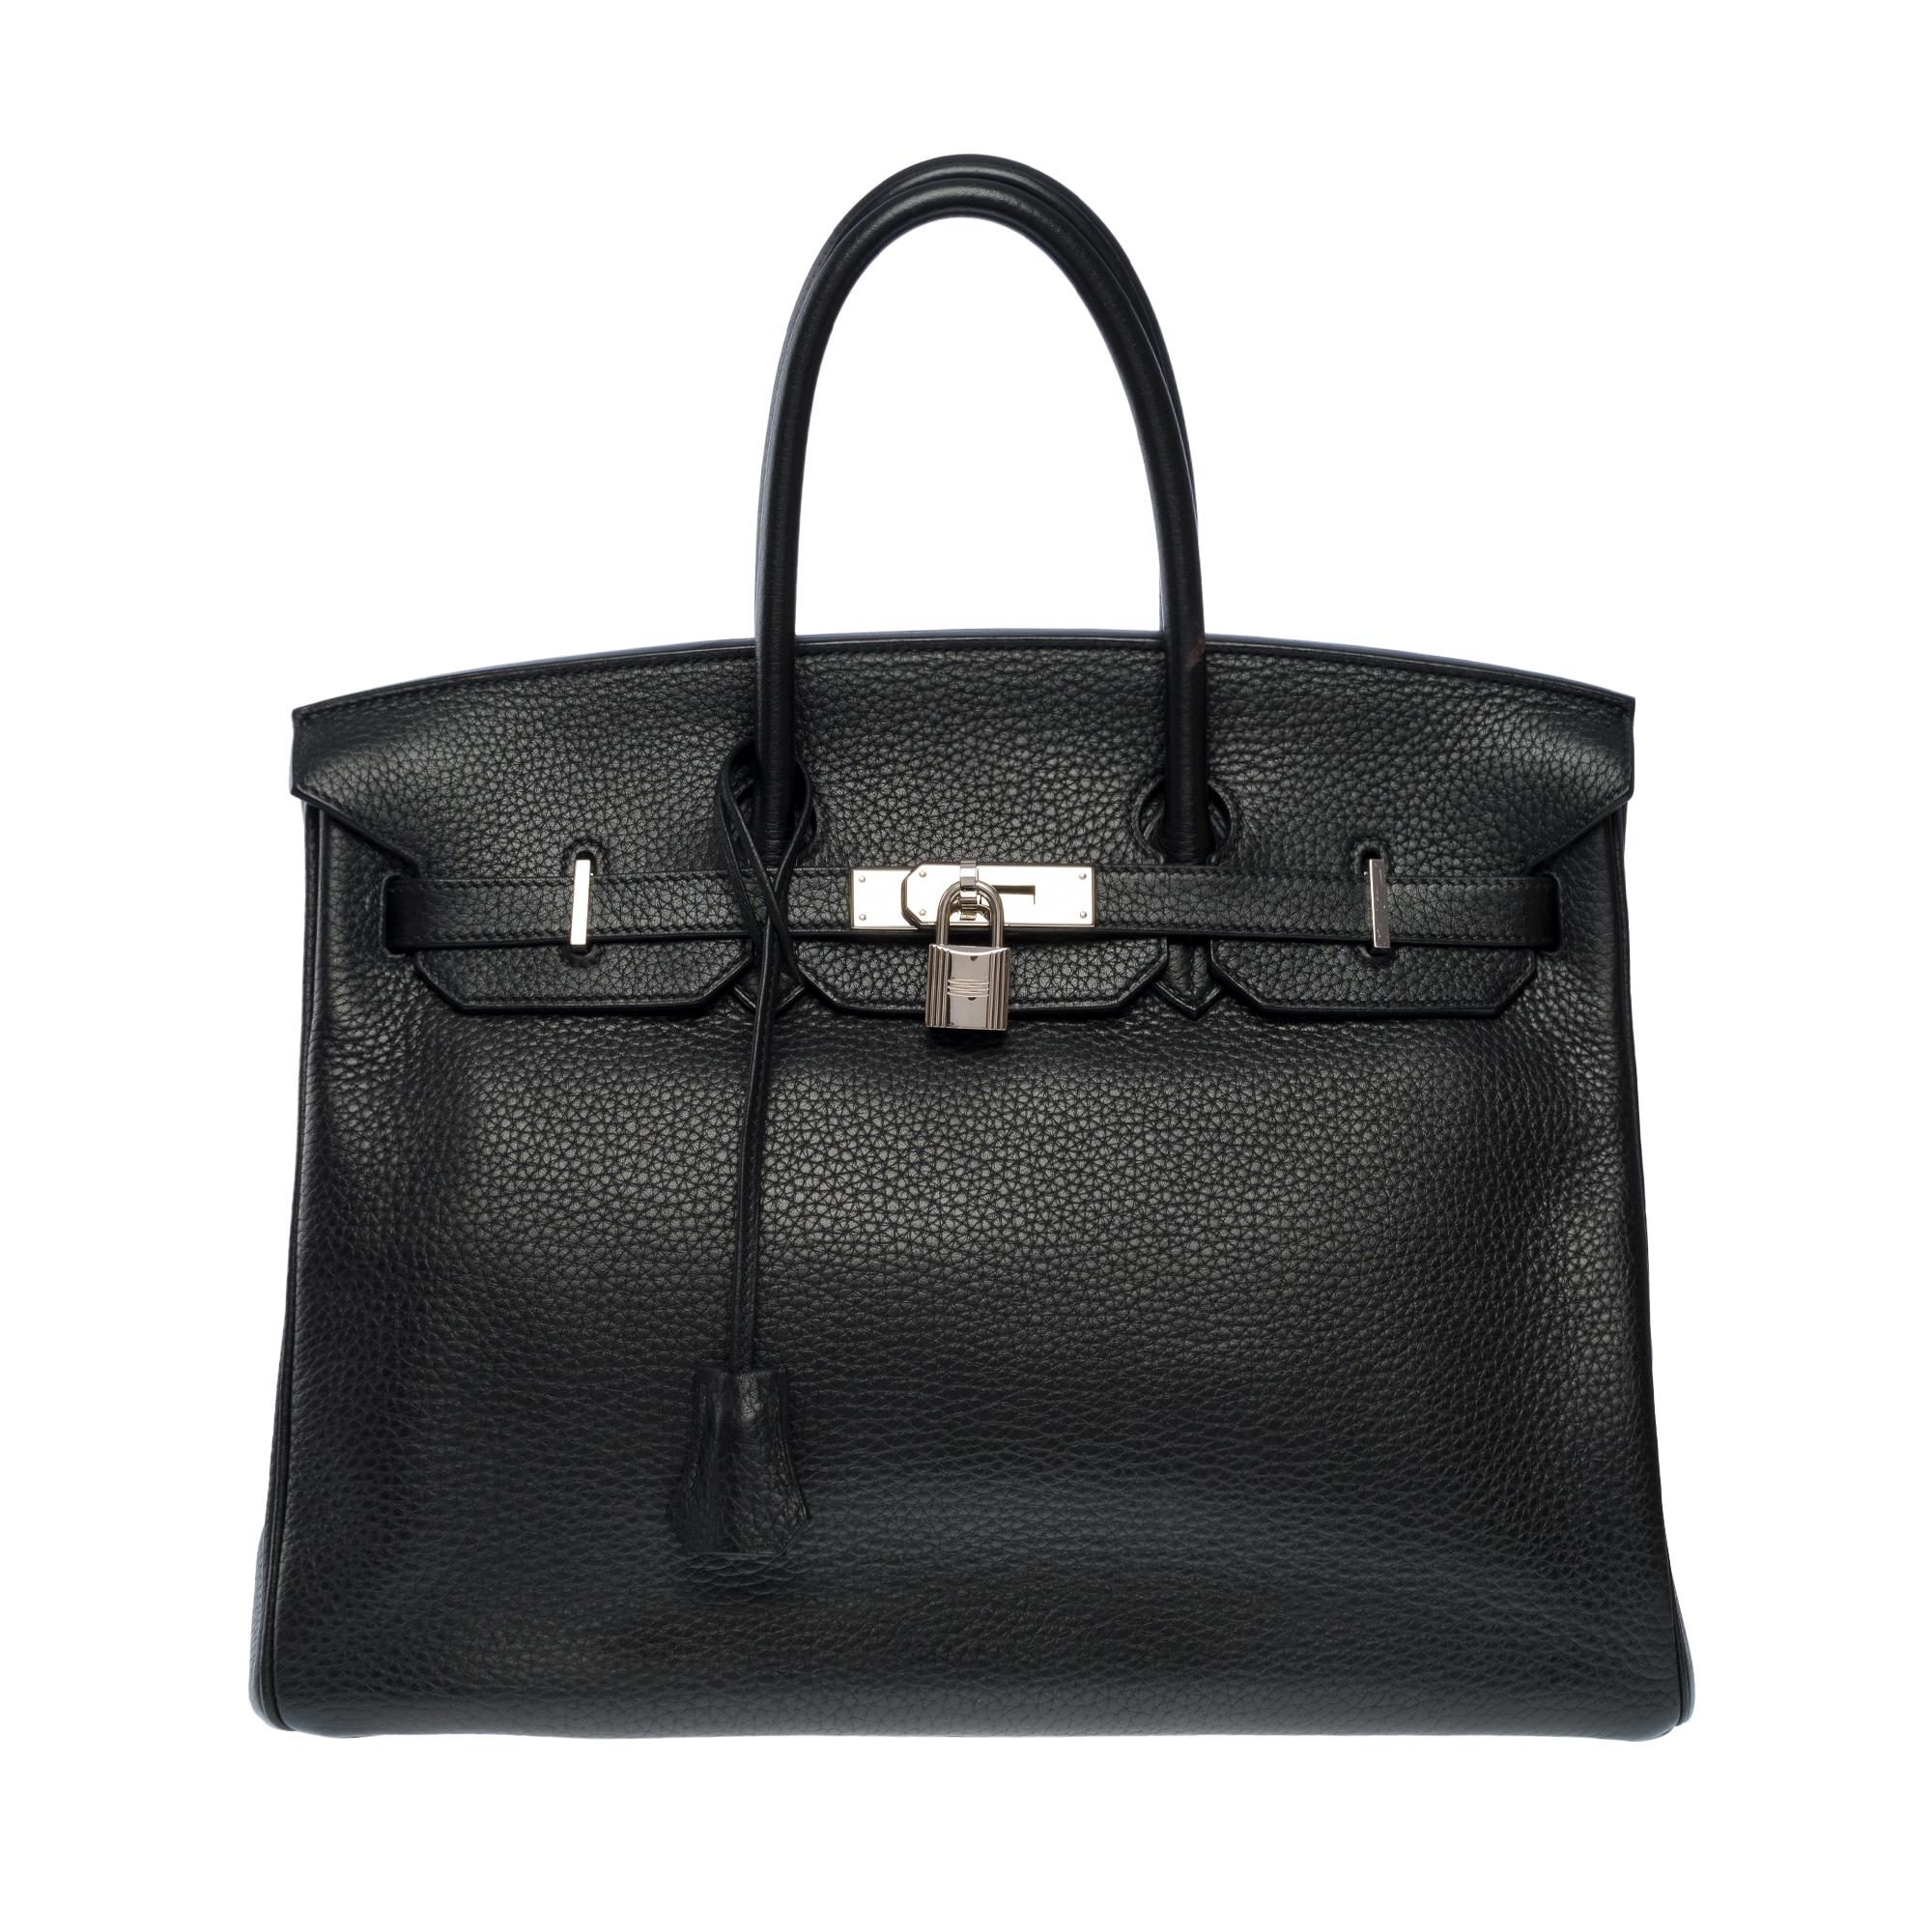 Amazing Birkin 35 handbag in black Togo leather , Palladium silver metal hardware, double black leather handle for hand Carry

Flap closure
Black leather lining, one zippered pocket, one patch pocket
Signature: 